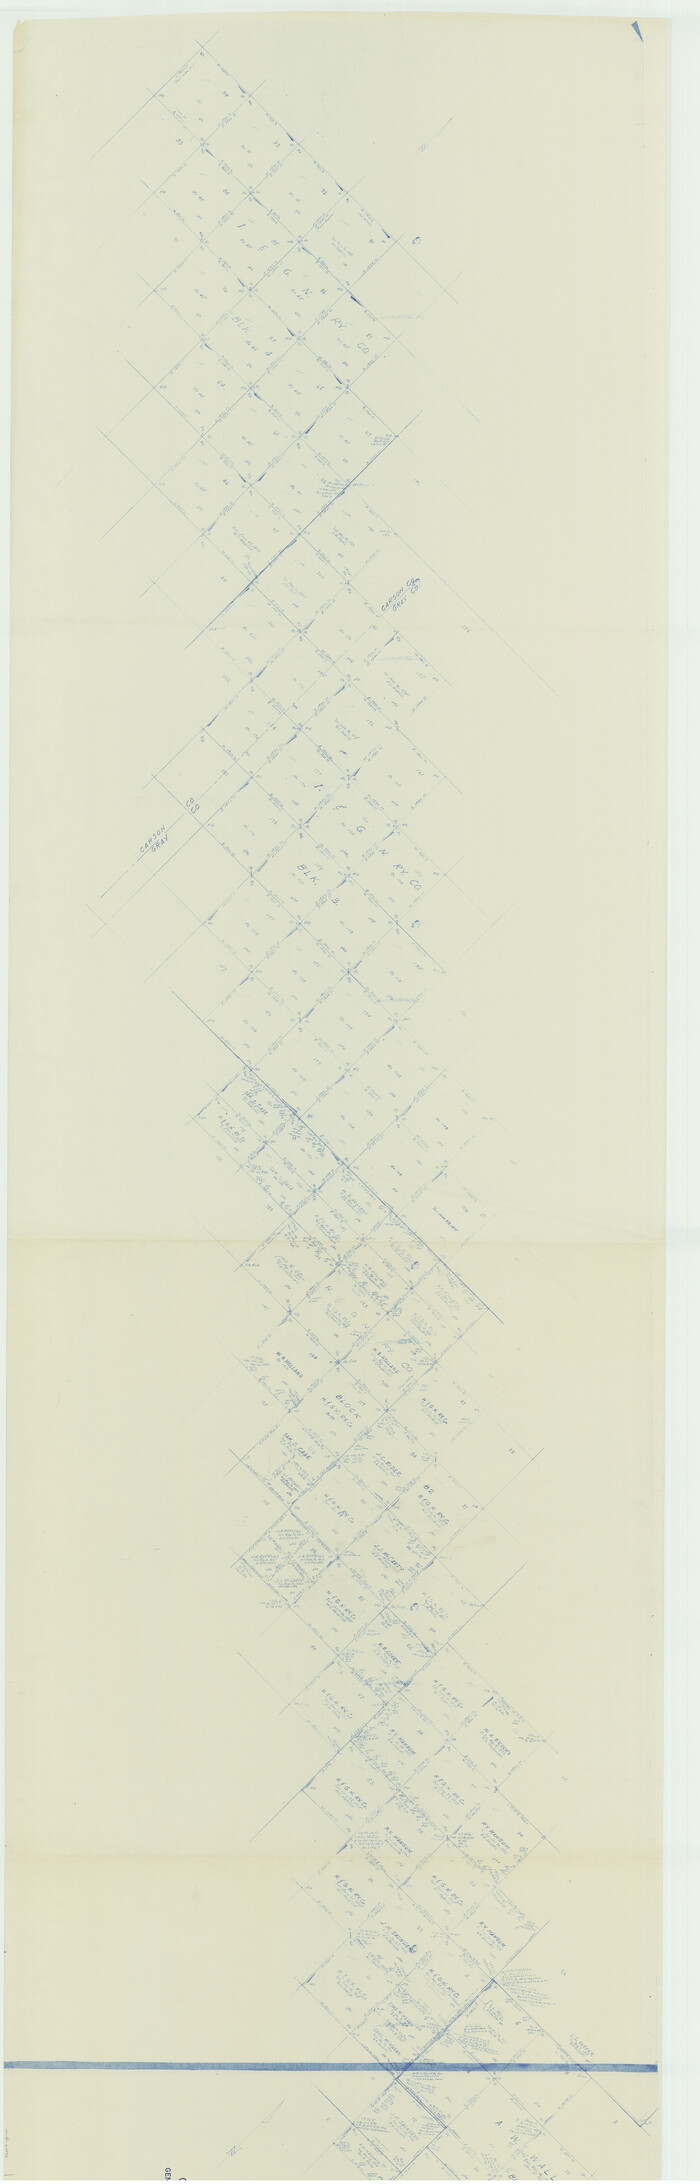 63232, Gray County Working Sketch 1, General Map Collection